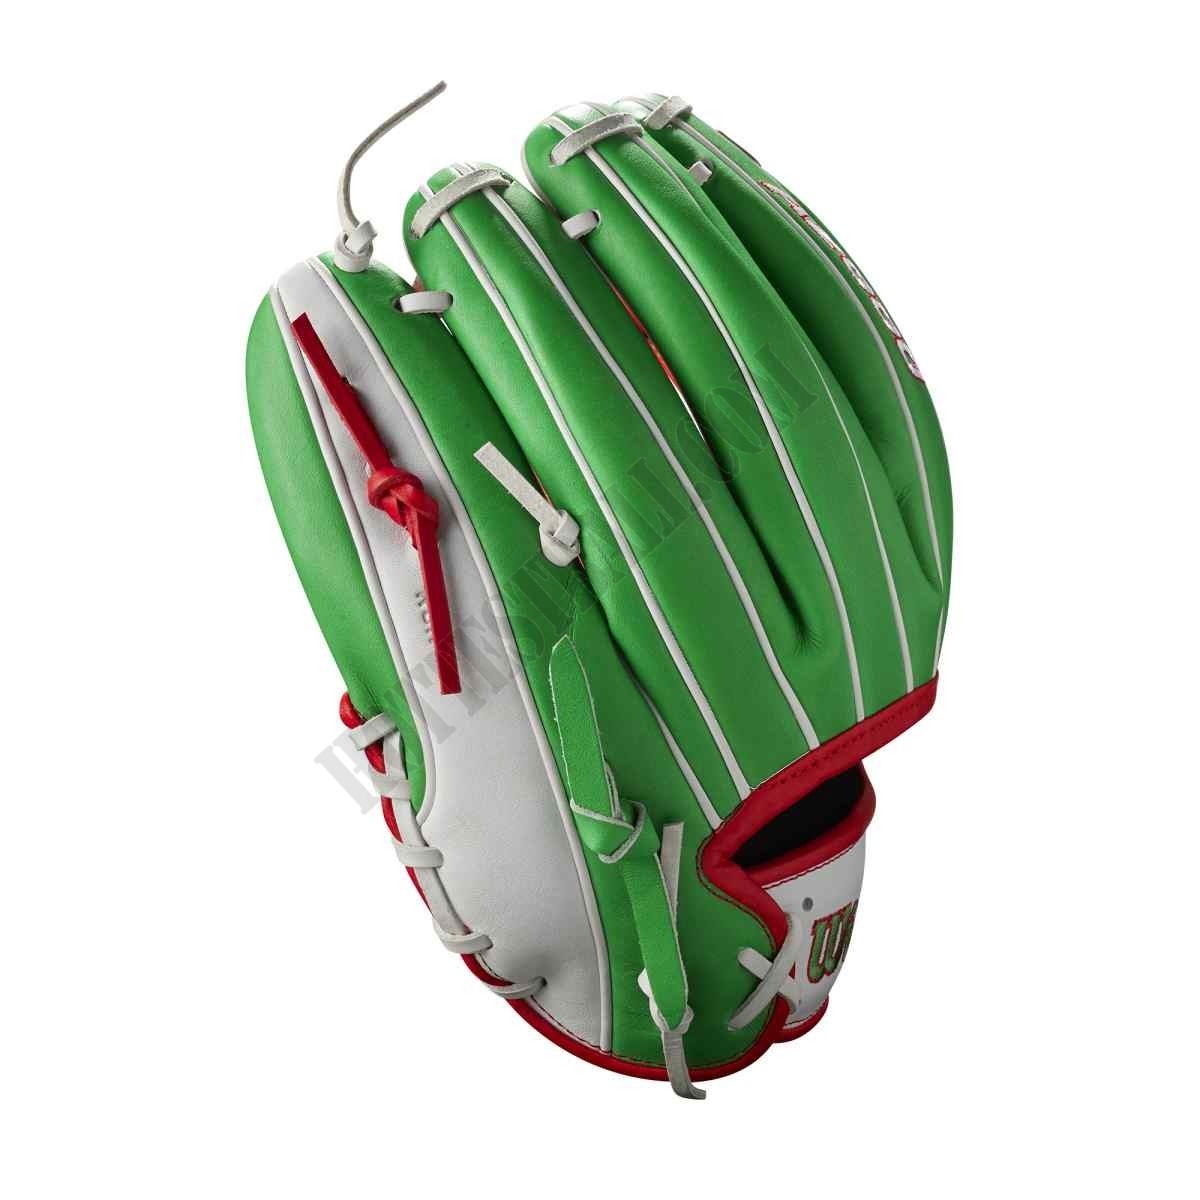 2021 A2000 1786 Mexico 11.5" Infield Baseball Glove - Limited Edition ● Wilson Promotions - -4